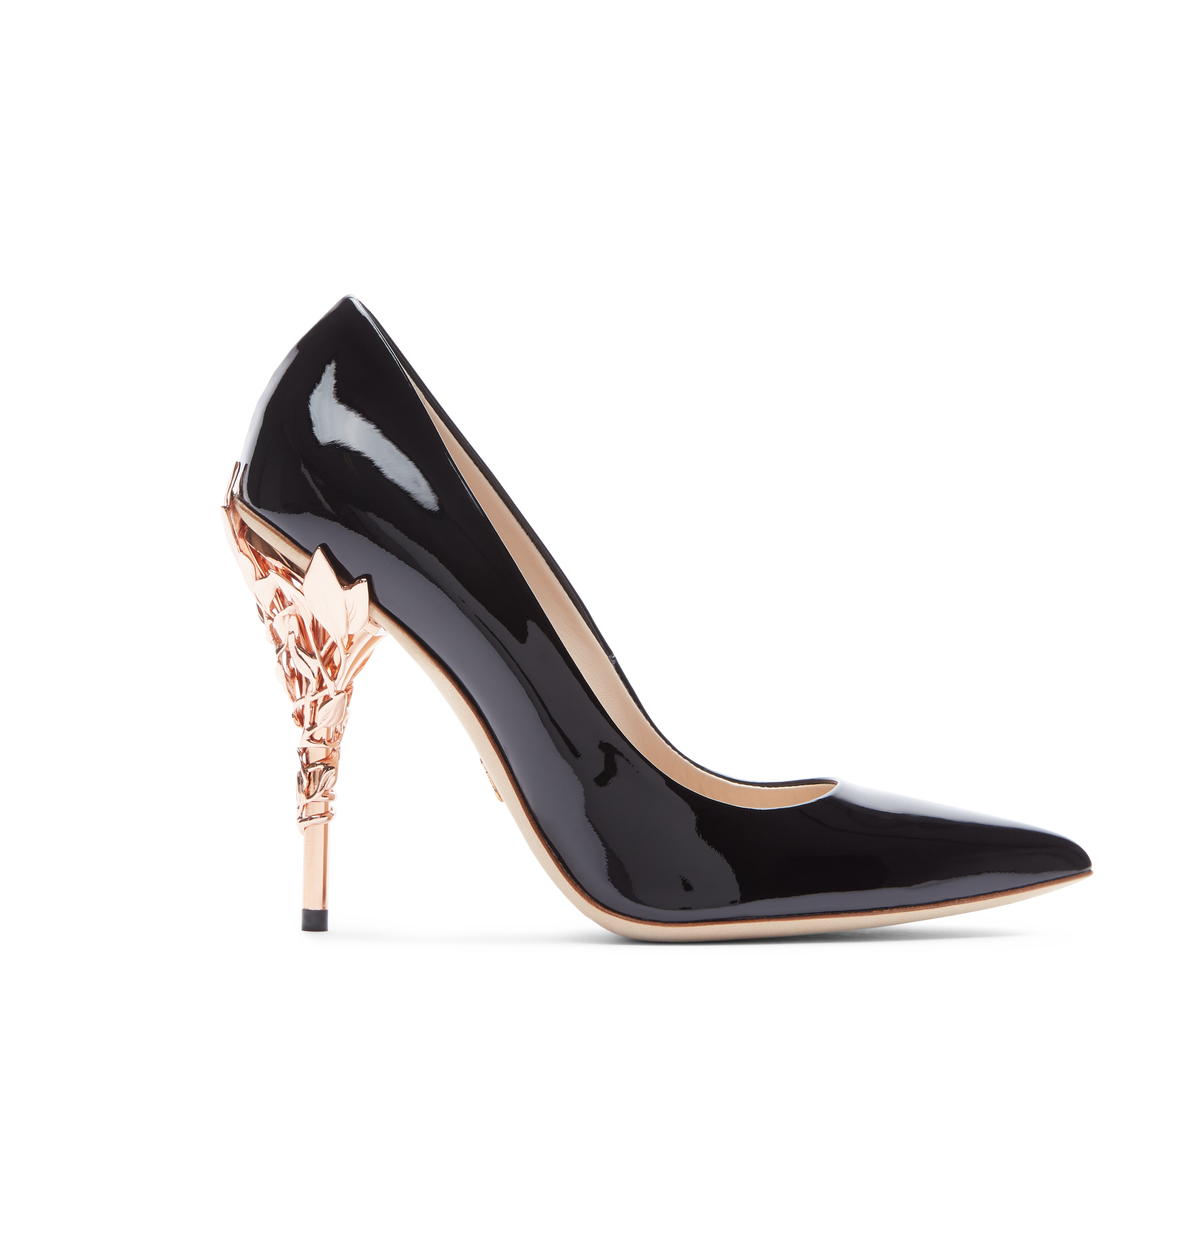 Black Patent Leather With Rose Gold Leaves